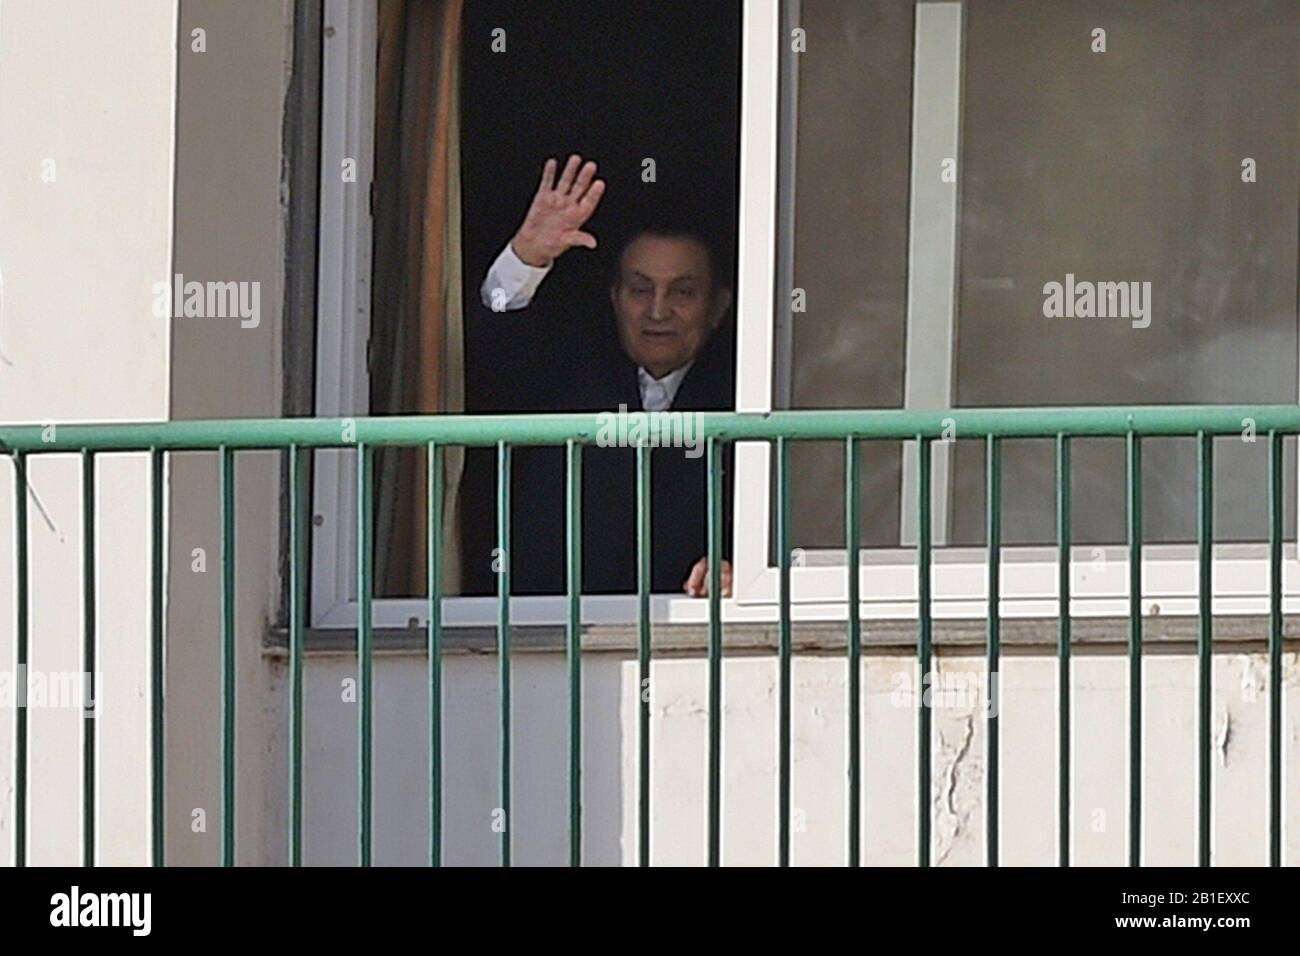 Cairo. 25th Apr, 2016. File photo taken on April 25, 2016 shows Hosni Mubarak waving to his supporters as they gather in front of Maadi Military Hospital where Mubarak is house arrested in Cairo, Egypt. Egyptian former President Hosni Mubarak has died at the age of 91 after suffering a long illness, state-run Nile TV reported on Tuesday. Credit: Zhao Dingzhe/Xinhua/Alamy Live News Stock Photo